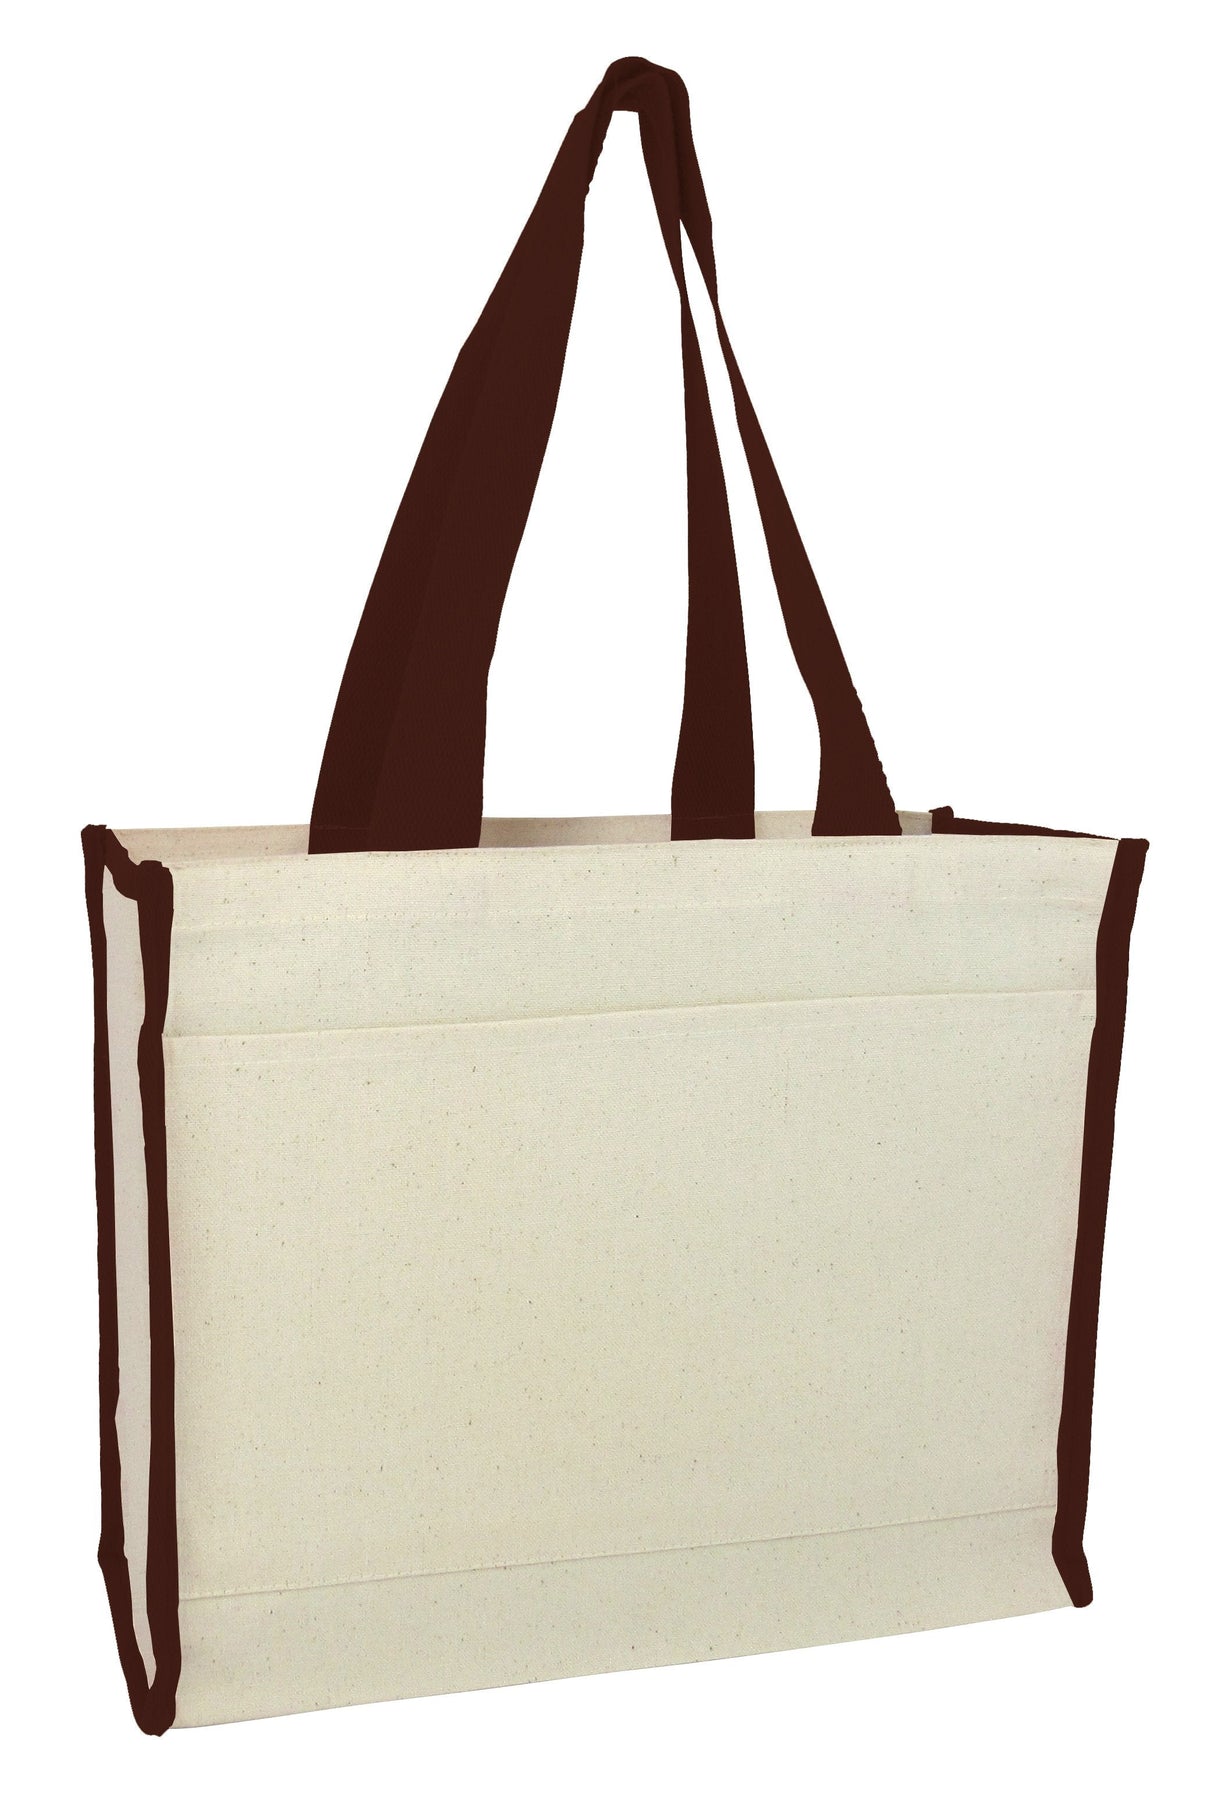 12 ct Heavy Canvas Tote Bag with Colored Trim - By Dozen - Alternative Colors